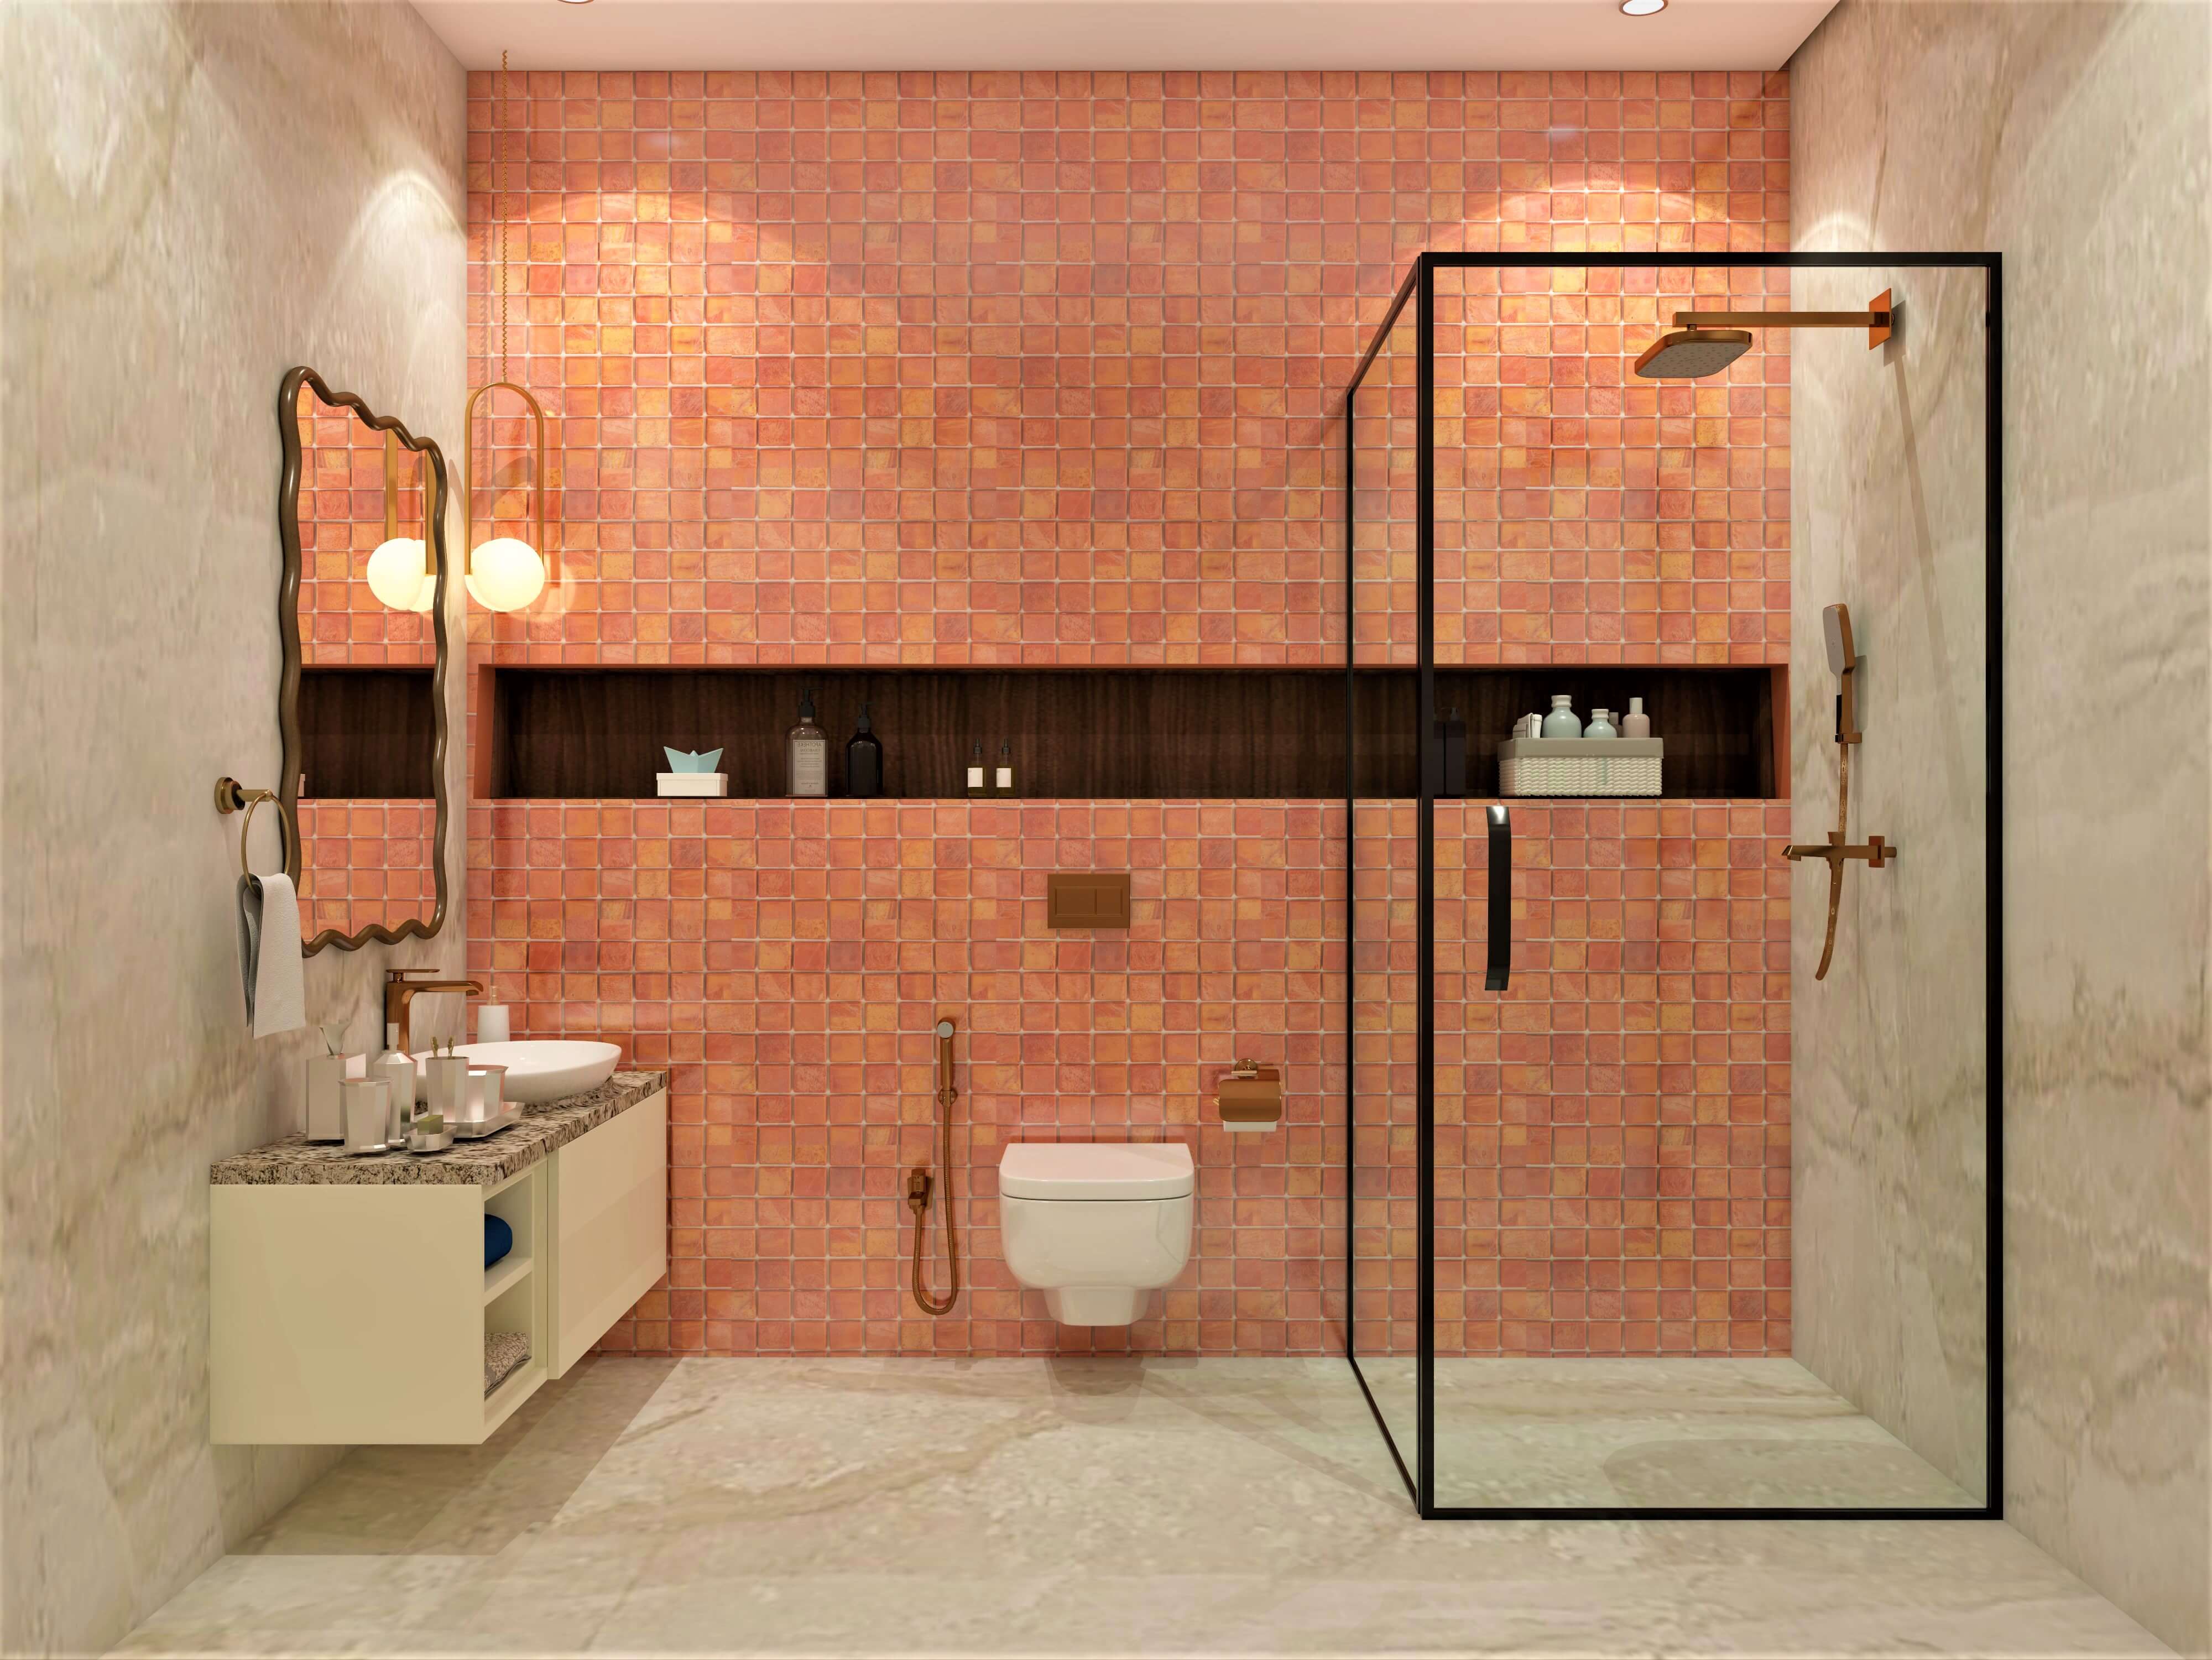 Contemporary bathroom design with shower cubicle - Beautiful Homes